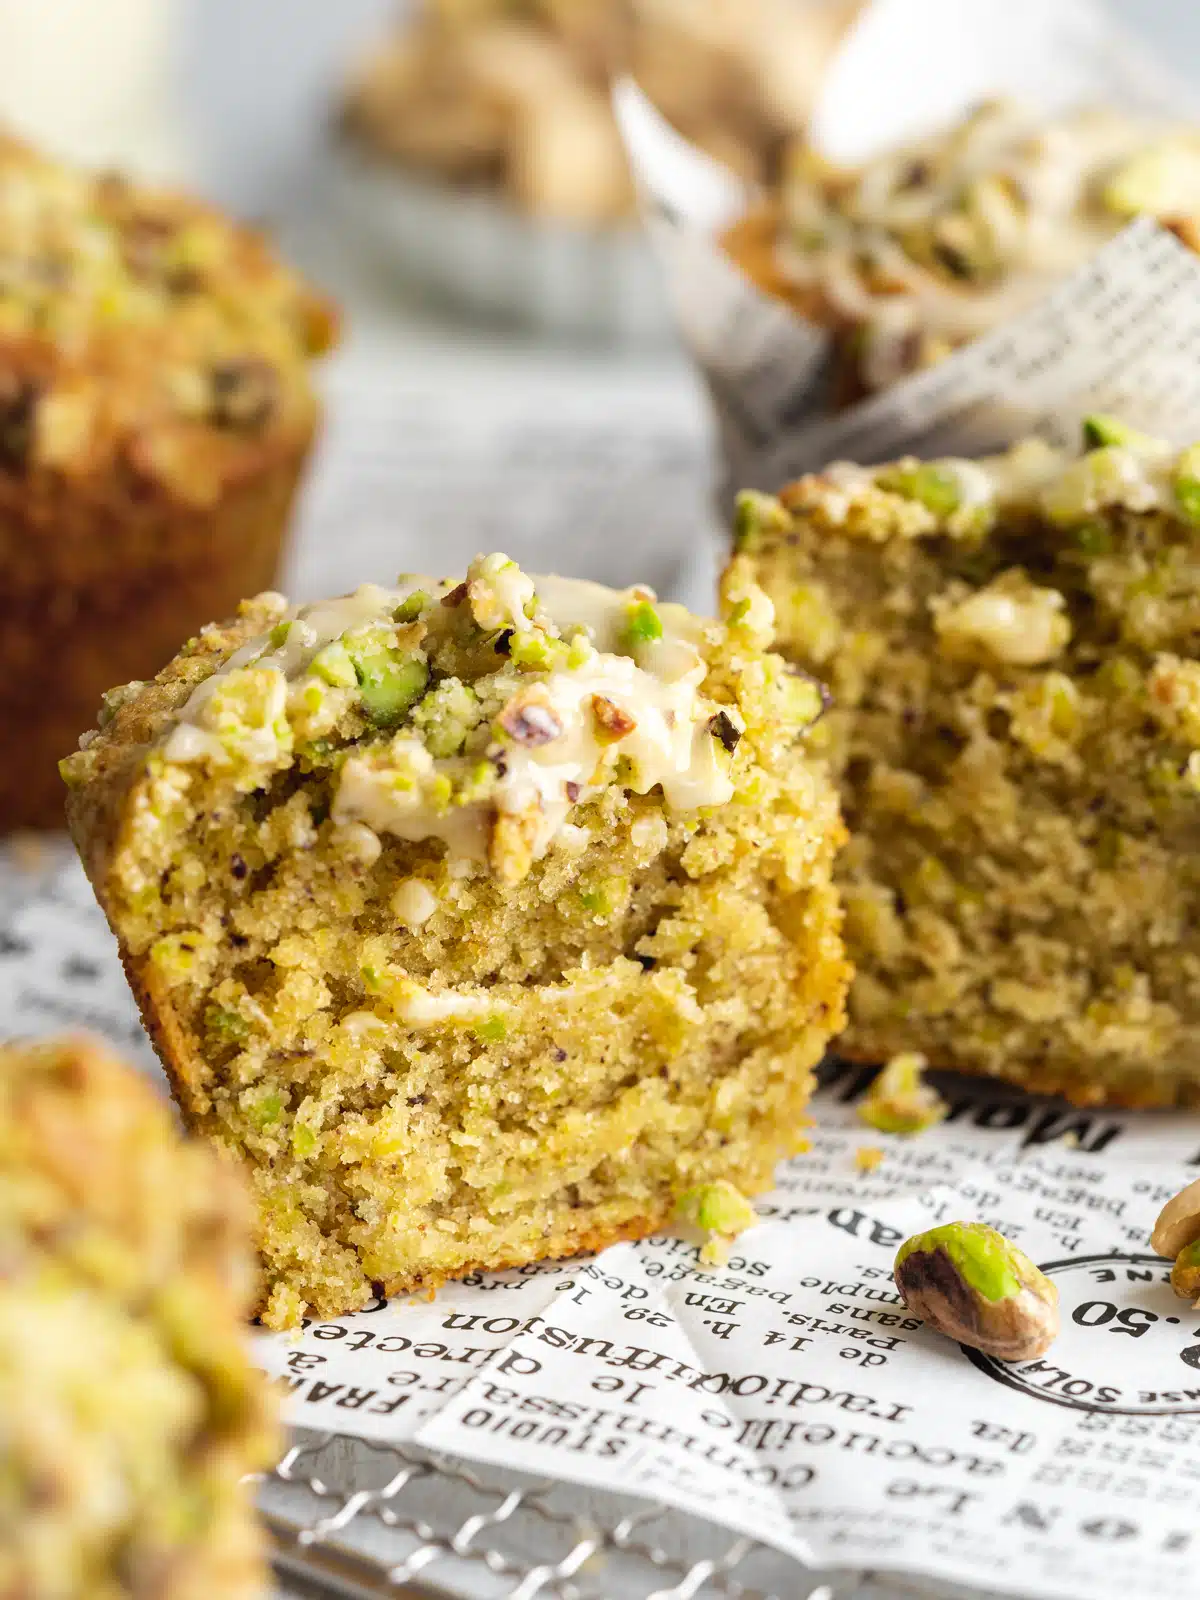 a pistachio muffin sliced in half showing the soft and fluffy crumb interior with pistachios scattered around the scene.